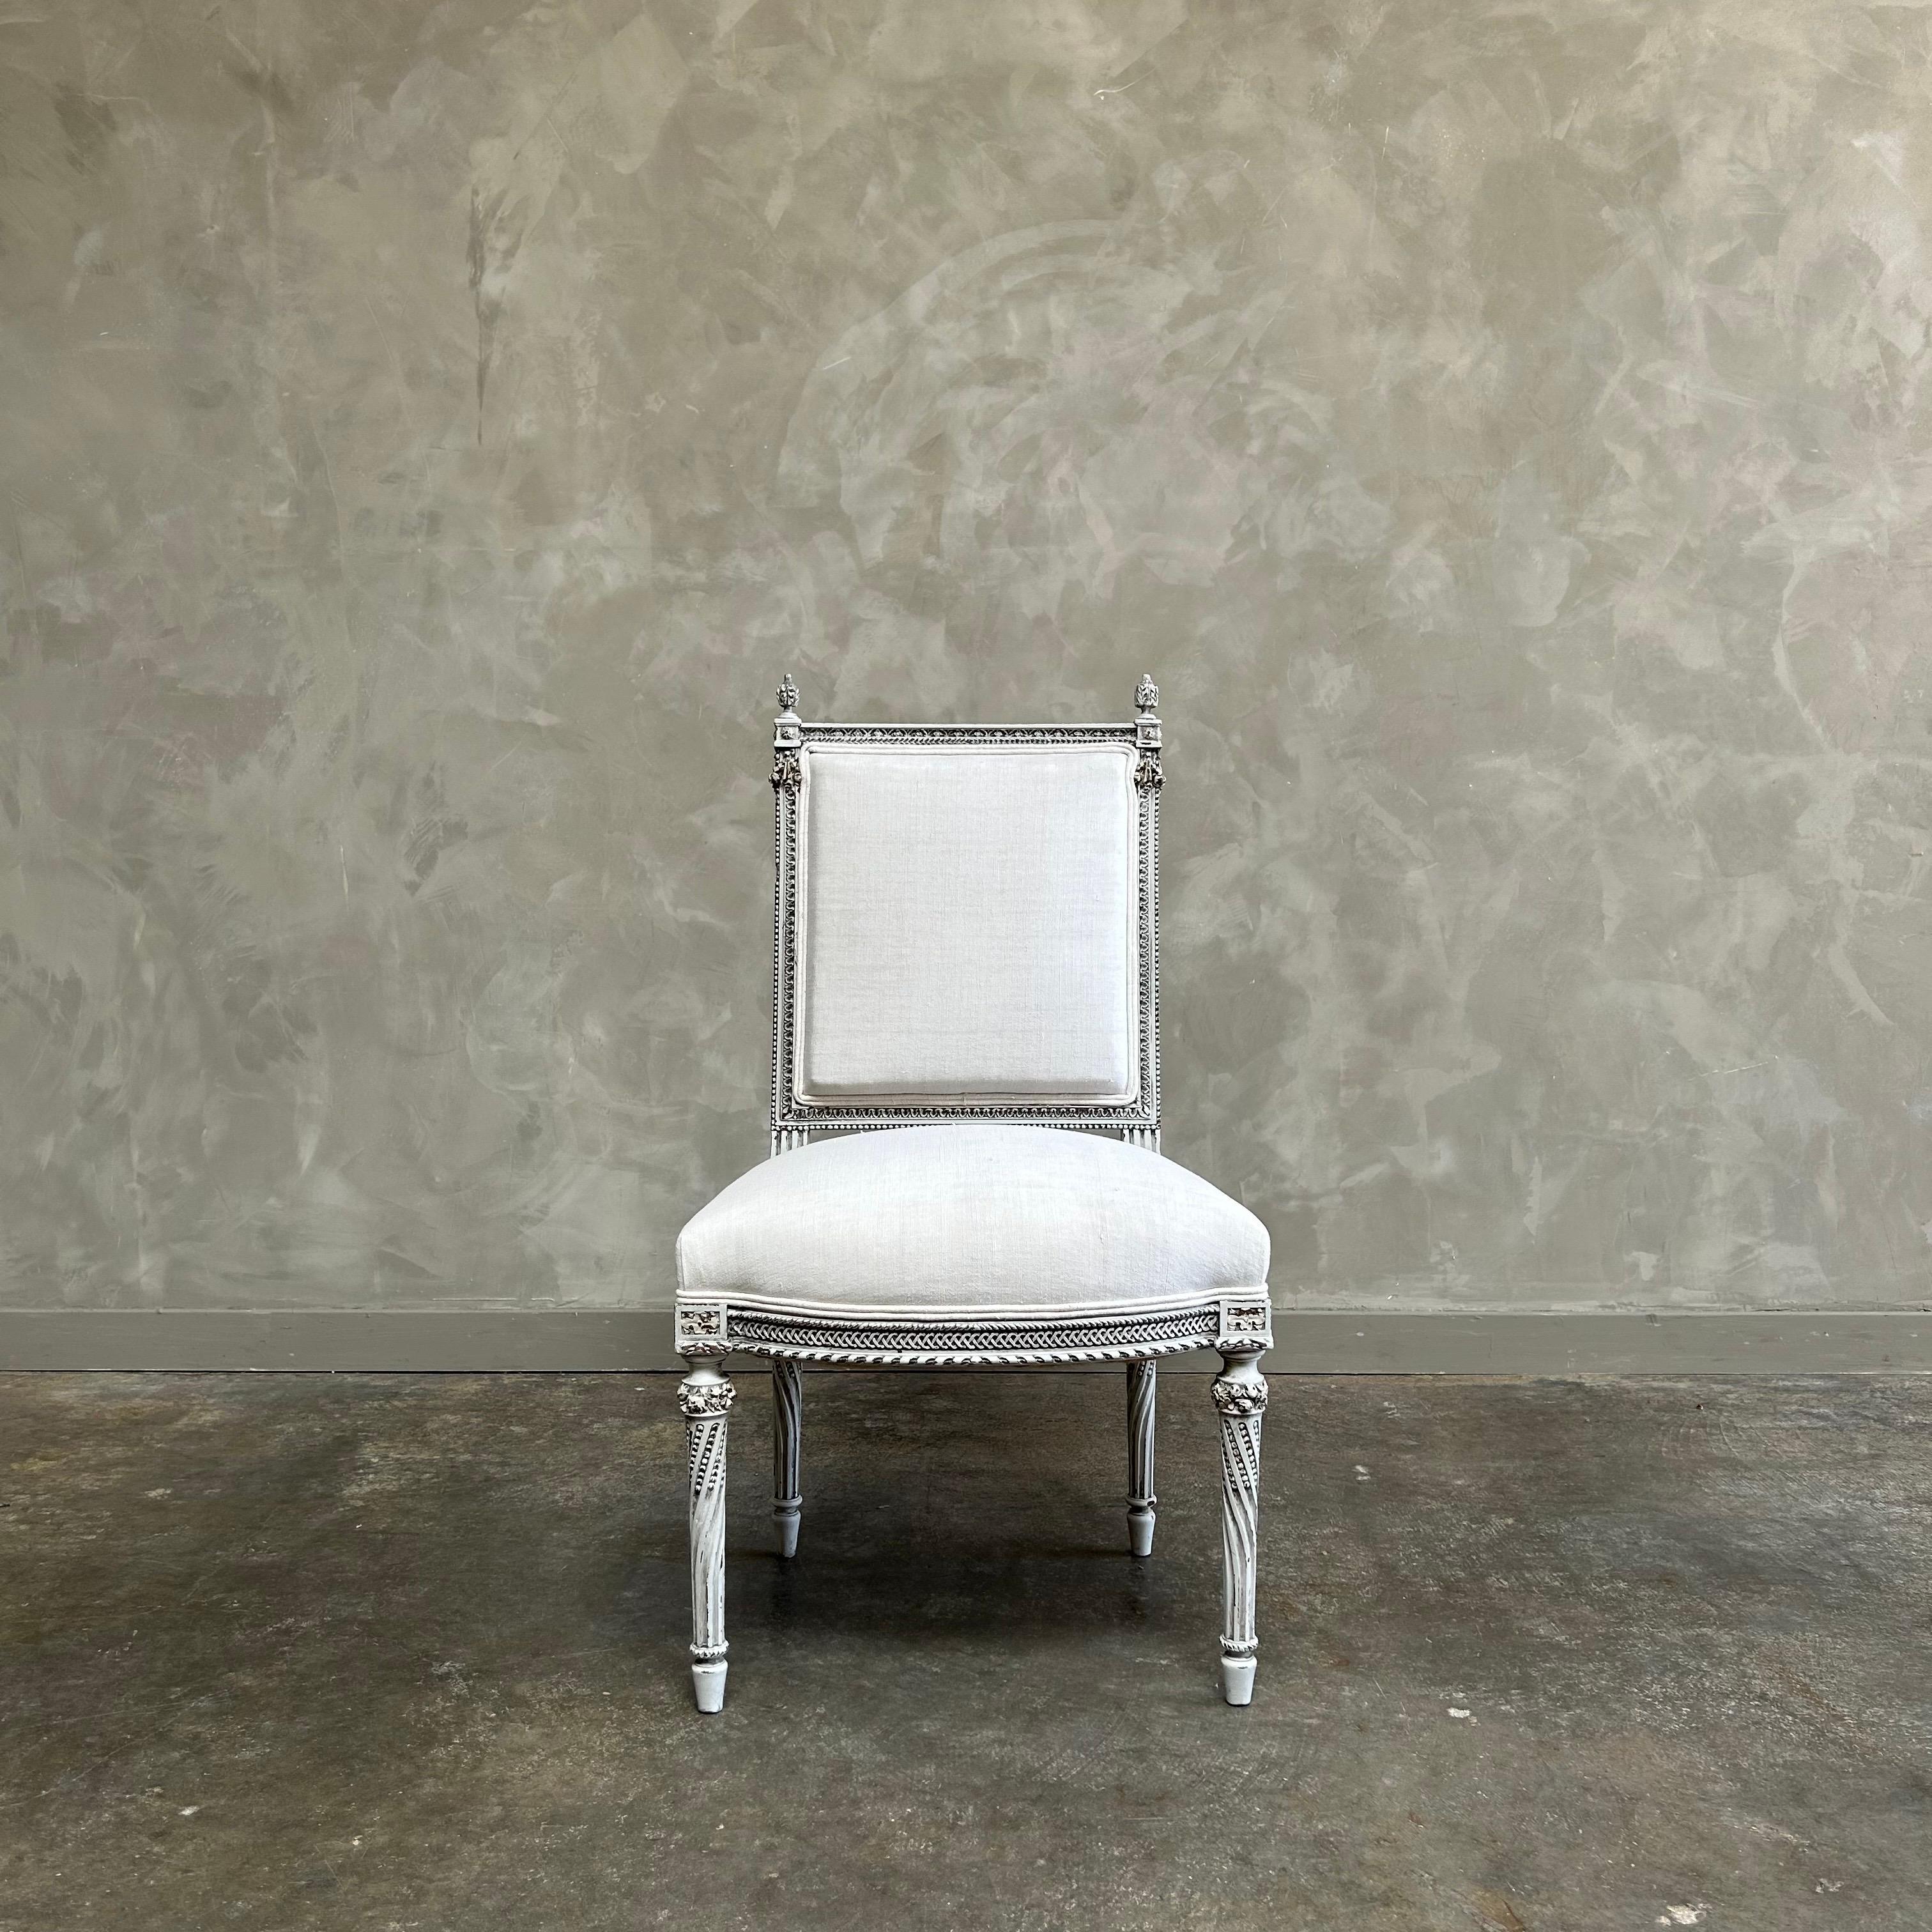 Antique Louis XVI style painted and upholstered chair
Painted in an oyster french gray washed finished, with subtle distressed edges, and upholstered in a standard cotton muslin.
Solid and sturdy ready for everyday use.
Antique chair 21”w x 21”d x